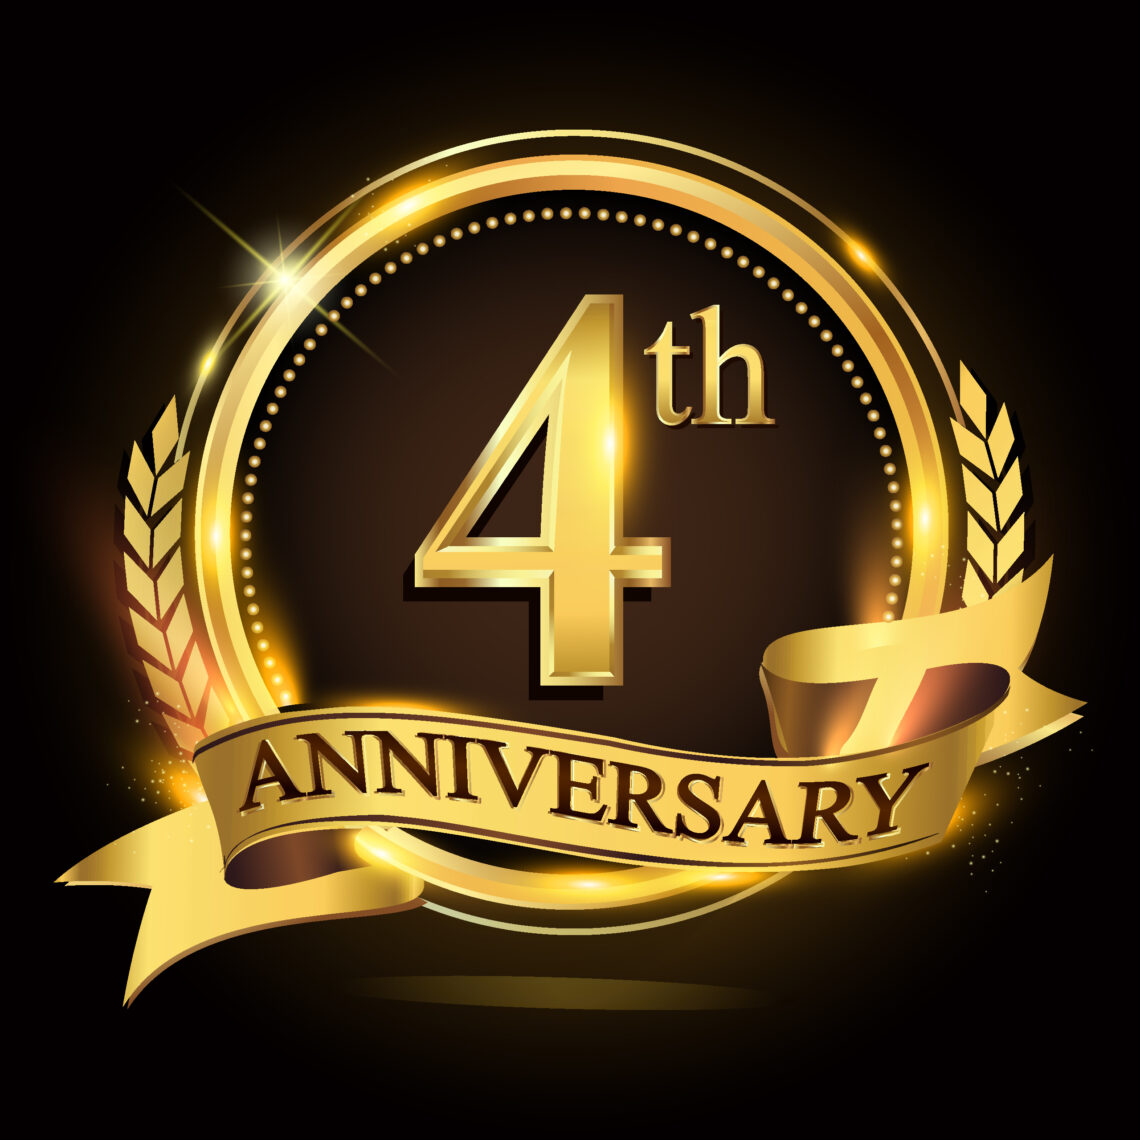 Top Ten Law Firm - Anniversary - Stanton IP Law Firm - Tampa - Florida